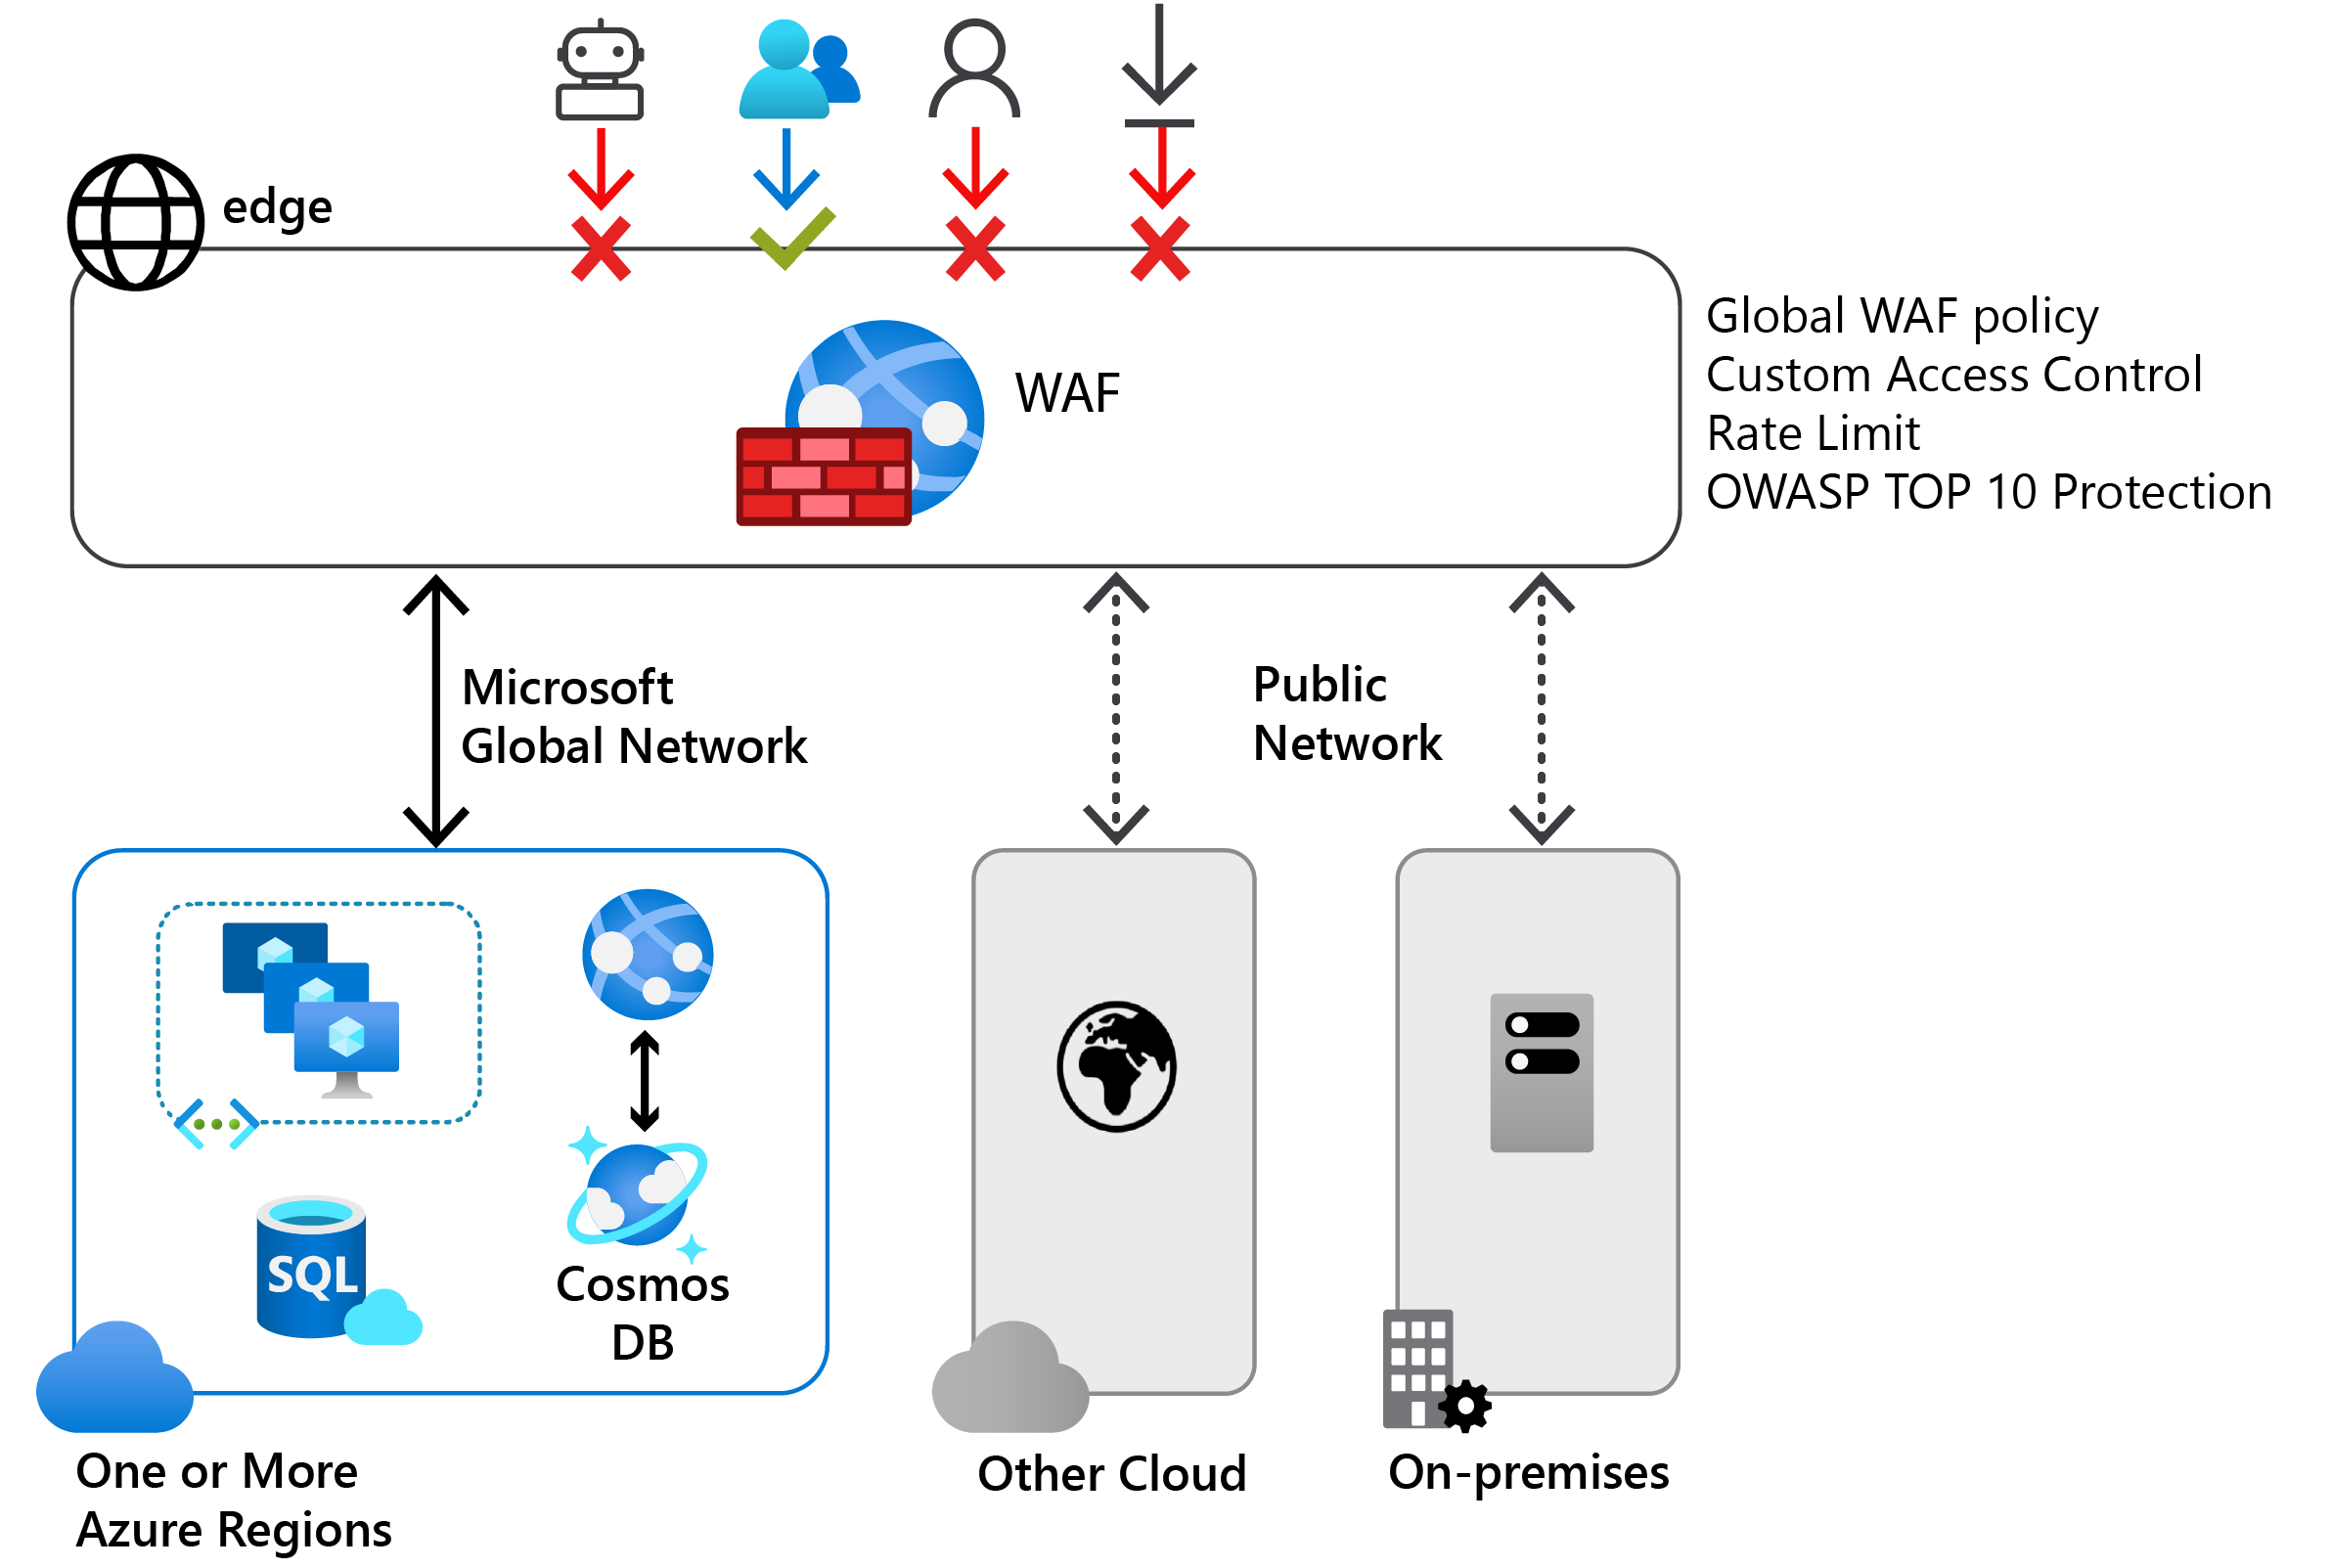 A typical Azure Web Application Firewall deployment. A Microsoft Global Network is comprised of Azure regions, and a Public Network includes an on-premises server and other cloud services. Separating these elements from the Azure resources is a web application firewall.